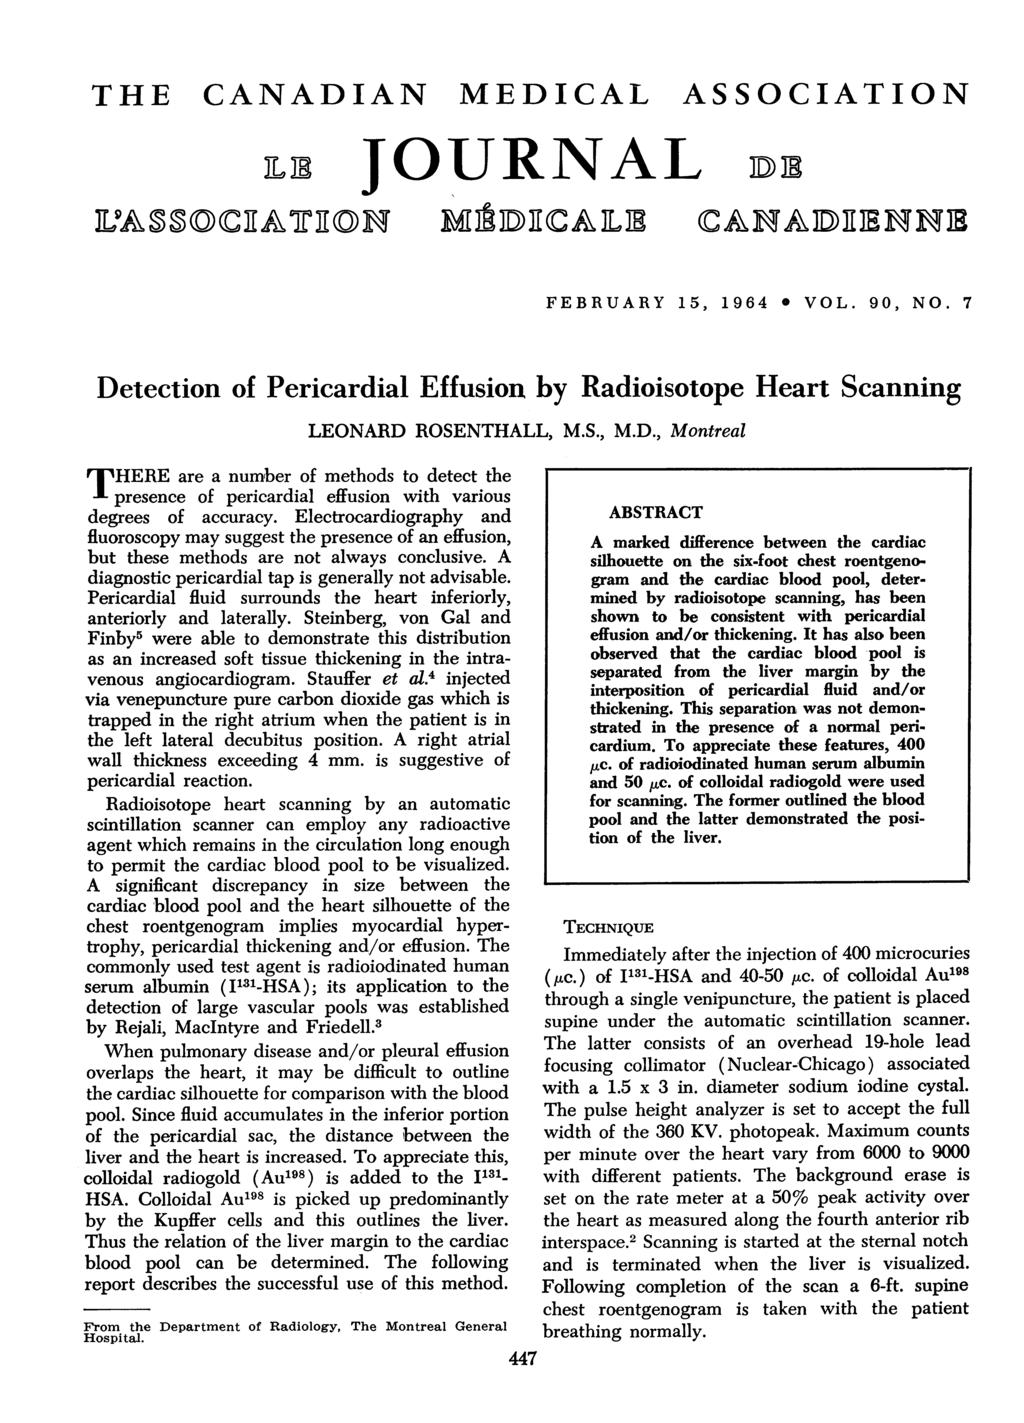 ASSOCIATION FEBRUARY 15, 1964 * VOL. 90, NO. 7 Detection of Pericardial Effusion by Radioisotope Heart Scanning LEONARD ROSENTHALI M.S., M.D., Montreal THERE are a number of methods to detect the presence of pericardial effusion with various degrees of accuracy.